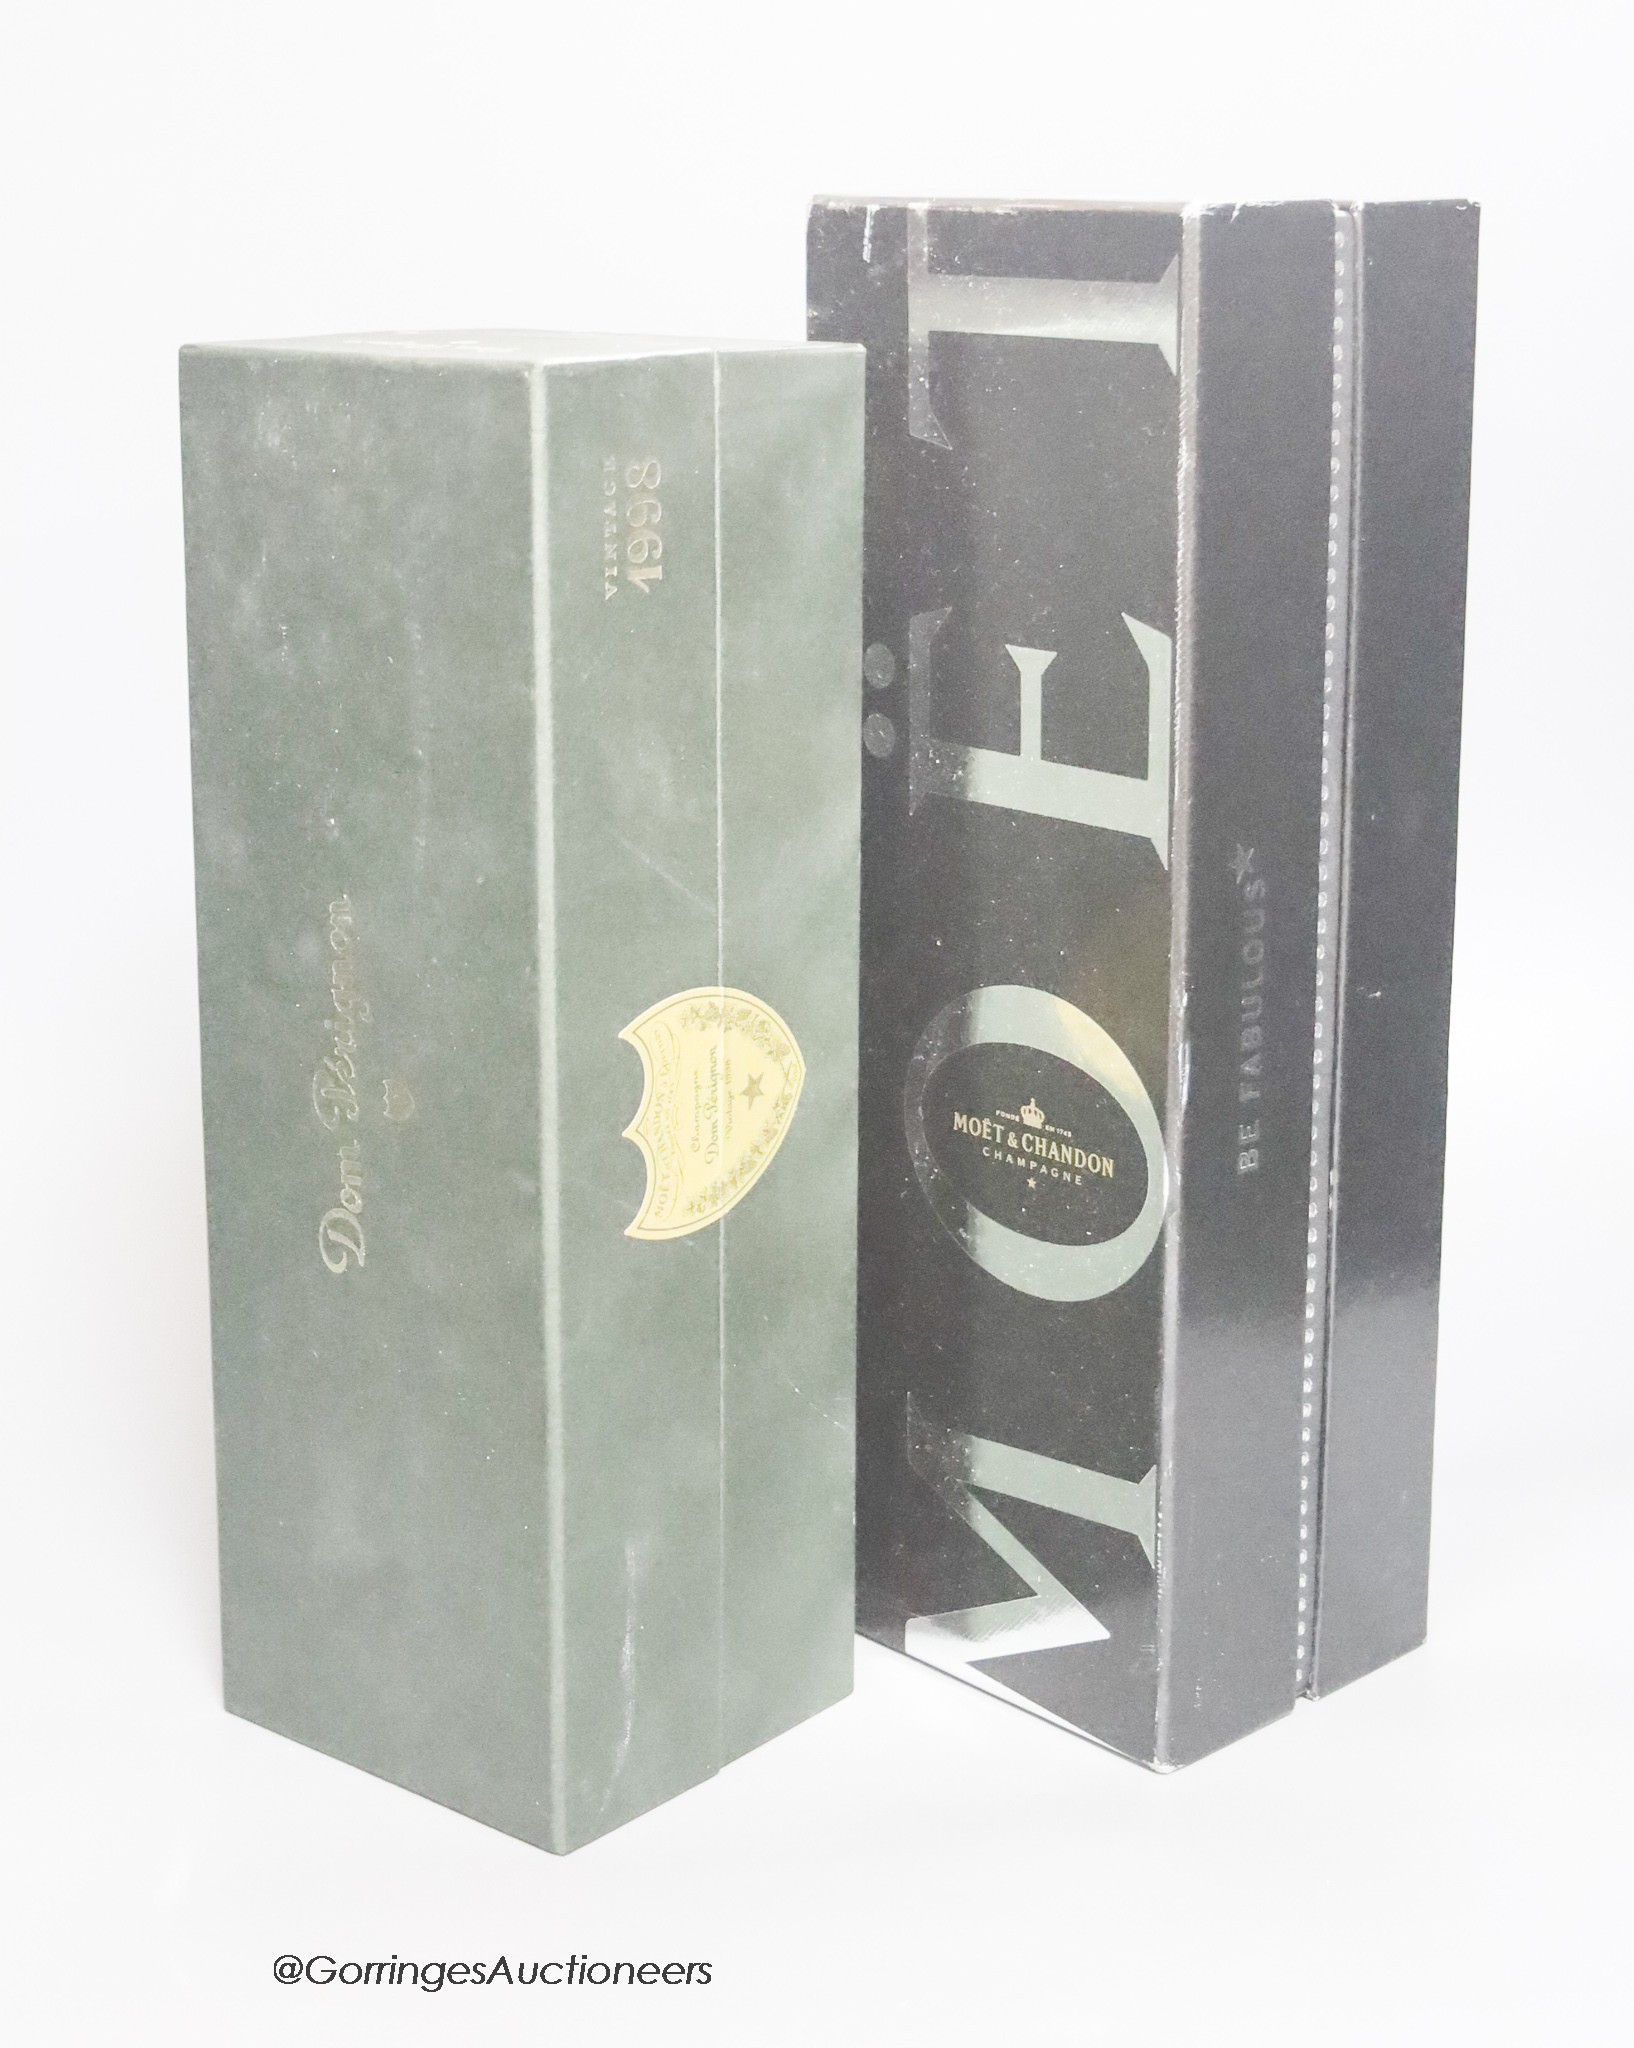 A bottle of 1998 Dom Perignon champagne, in a sealed presentation box and a bottle of Moet Chandon 'diamond' champagne, boxed